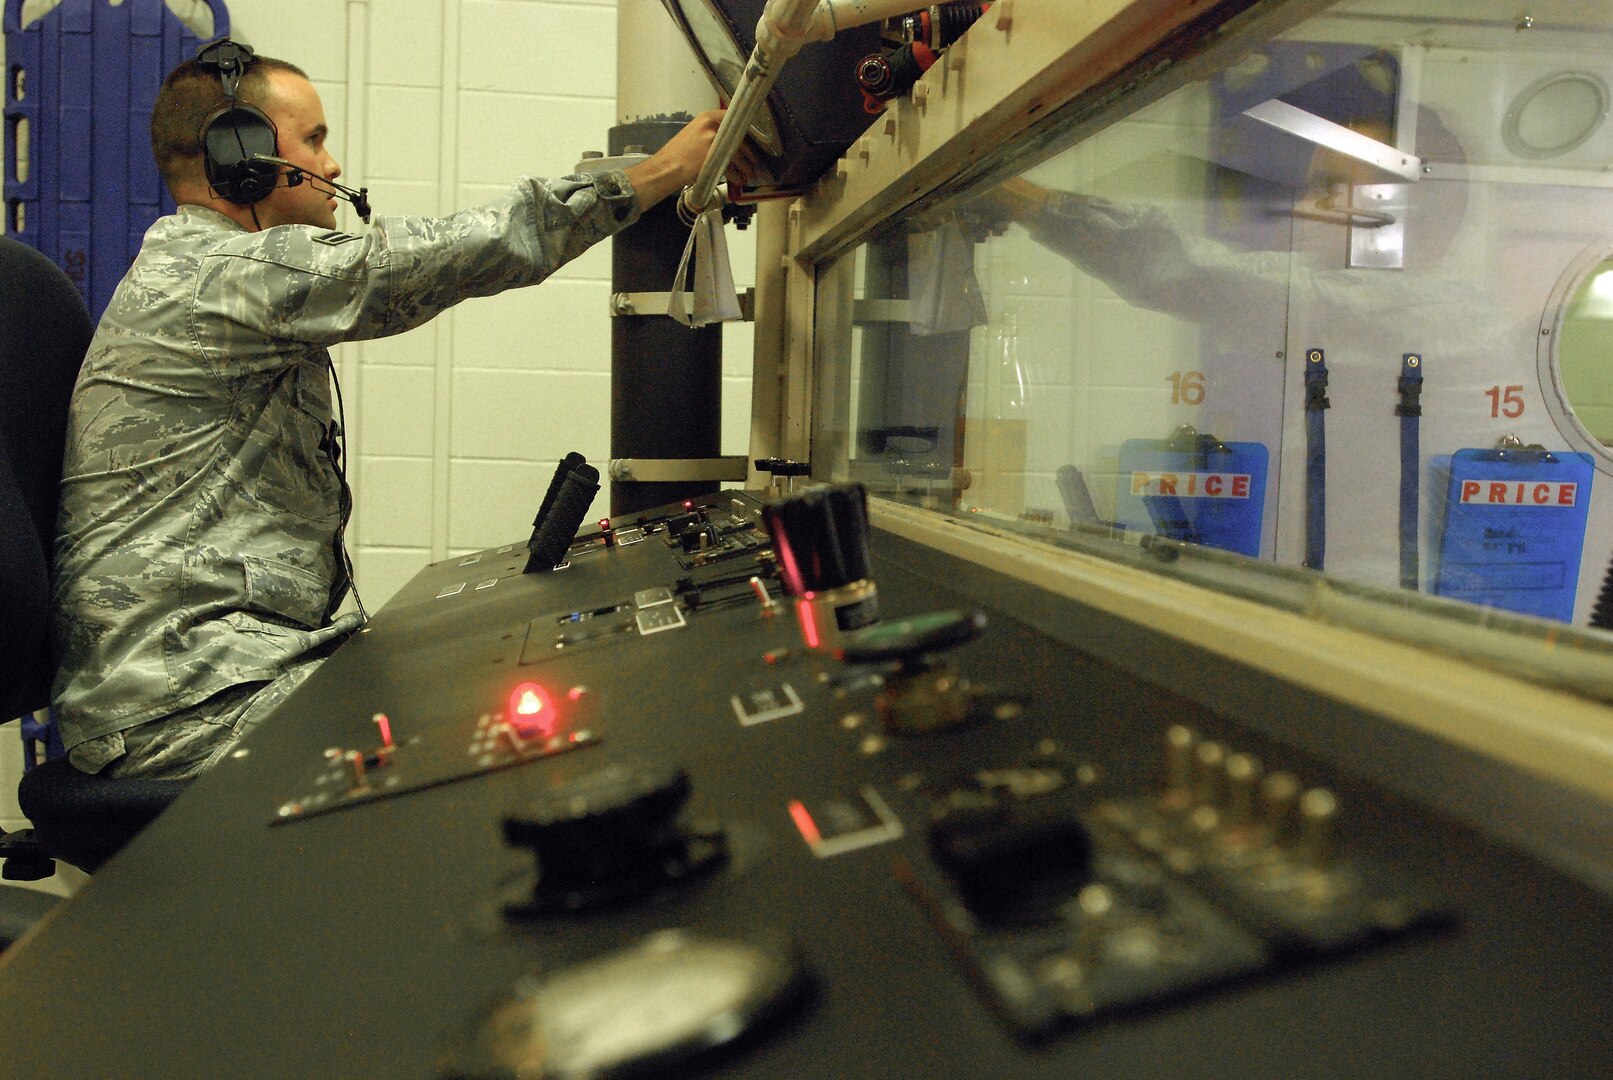 Airman 1st Class Joseph Kennedy, 359th Aeromedical Squadron, performs preflight checks while at the controls of the hypobaric chamber used for altitude training and testing of aircrew and pilots, Randolph Air Force Base, Texas. (U. S. Air Force photo/Brian McGloin)